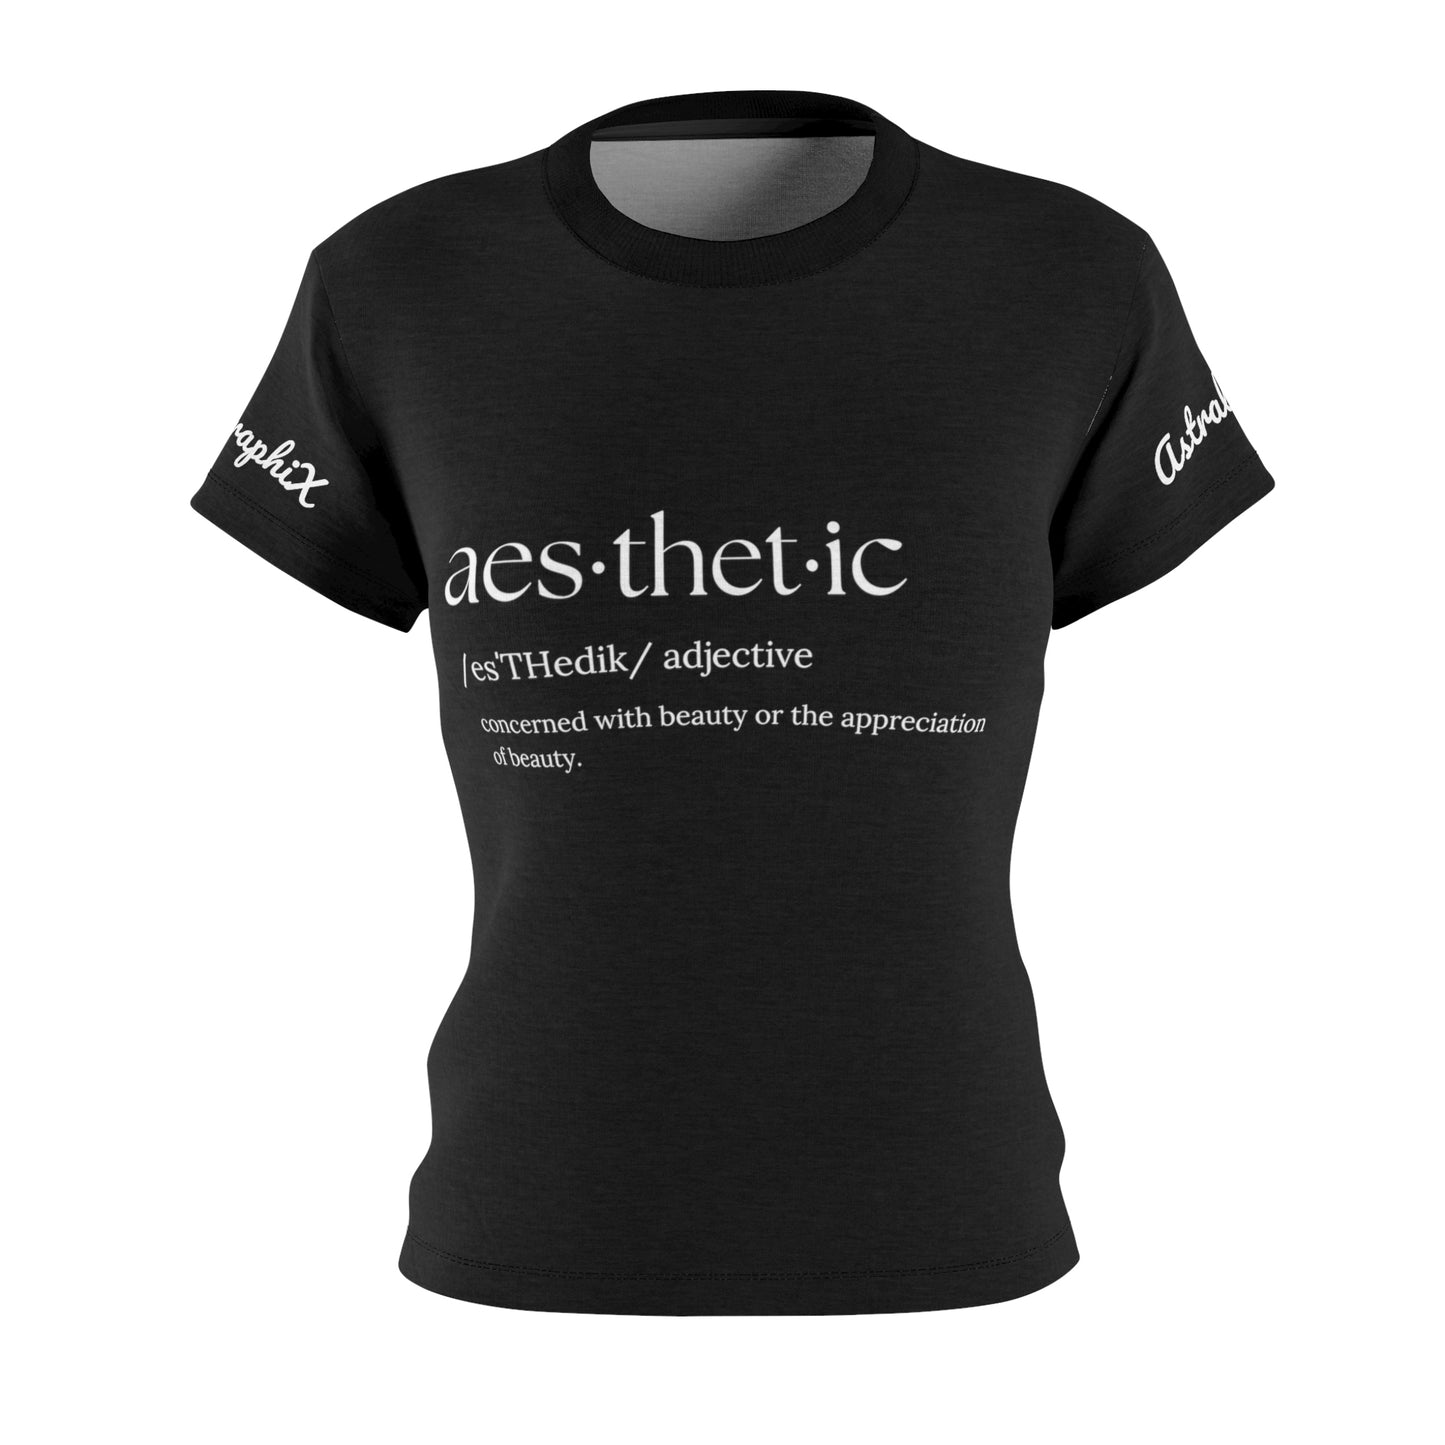 Word Art Collection - Women's Cut & Sew Tee (AOP) - Aes-thet-ic in Black